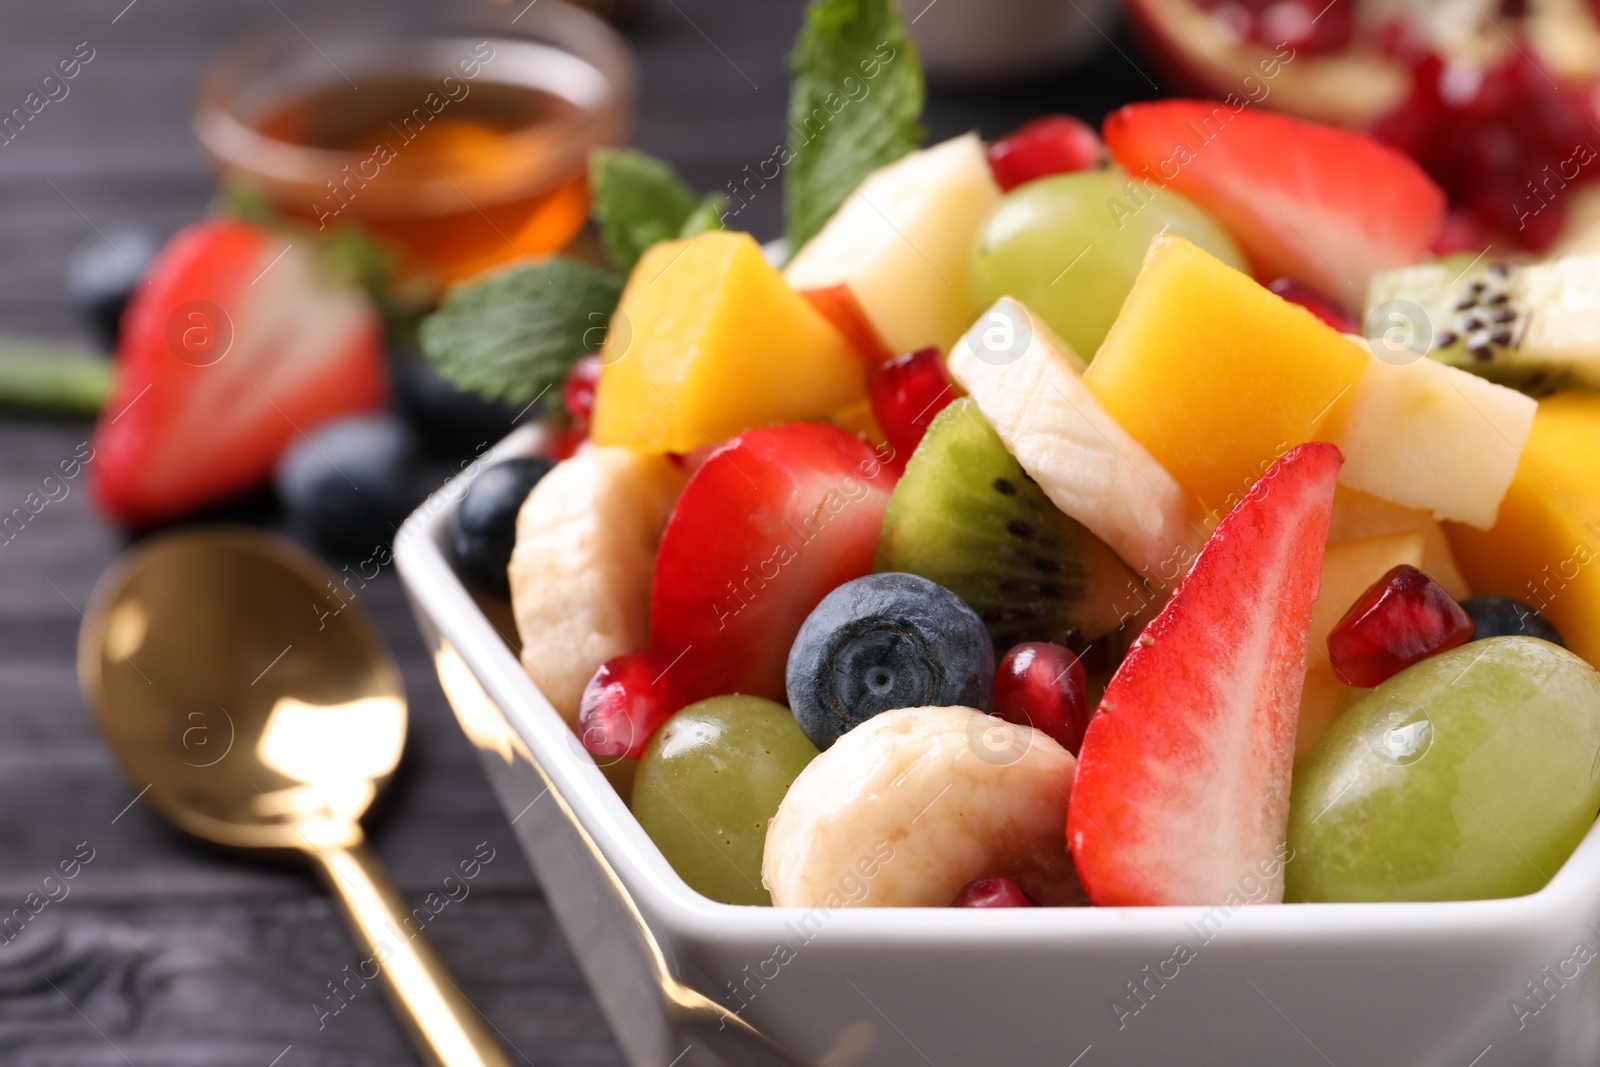 Photo of Delicious fresh fruit salad in bowl on table, closeup view